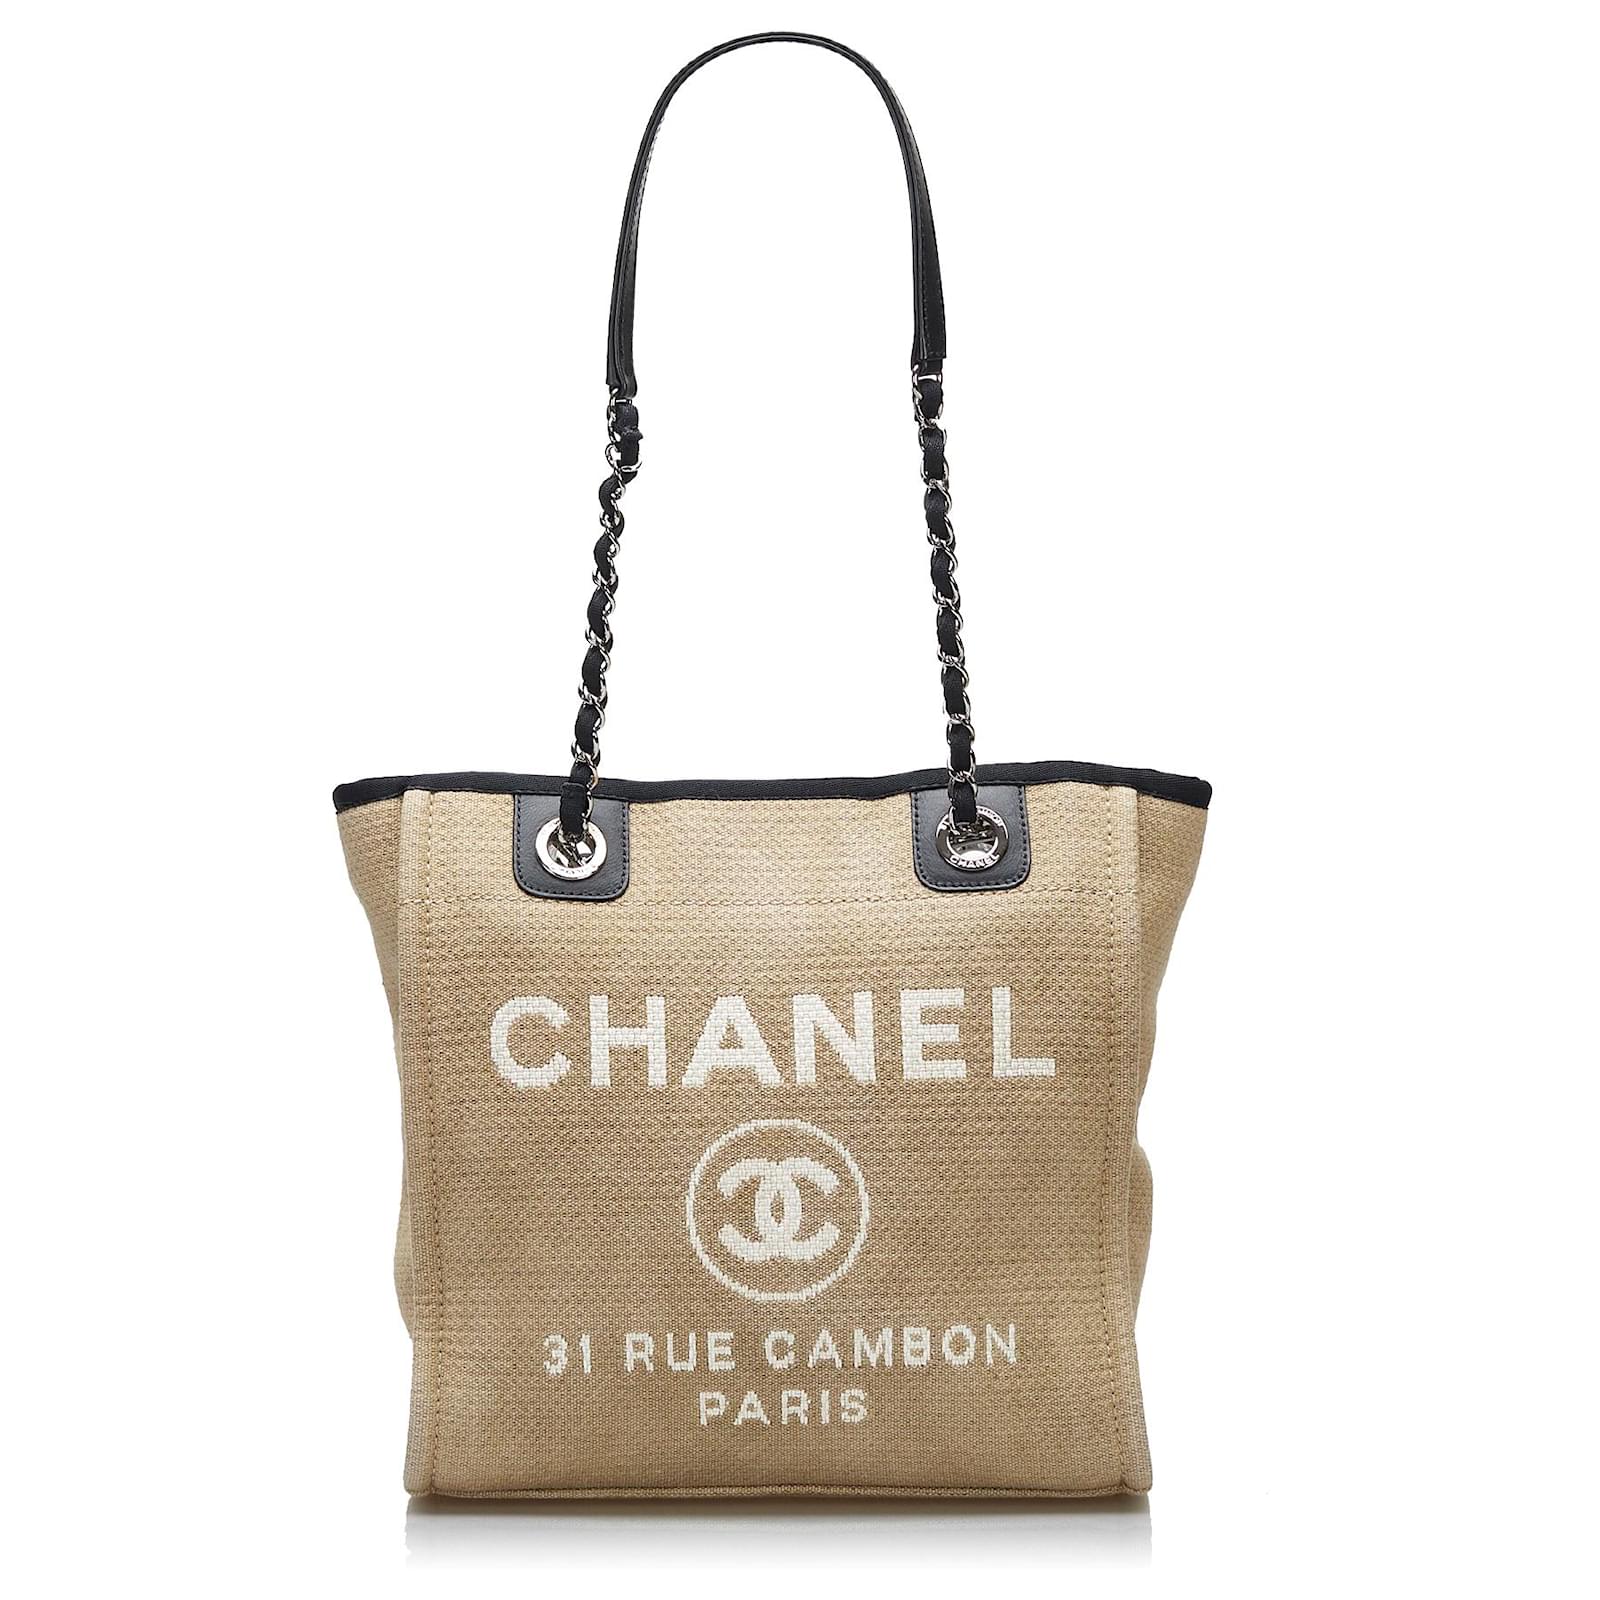 Chanel Beige/Brown Deauville Tote Chanel